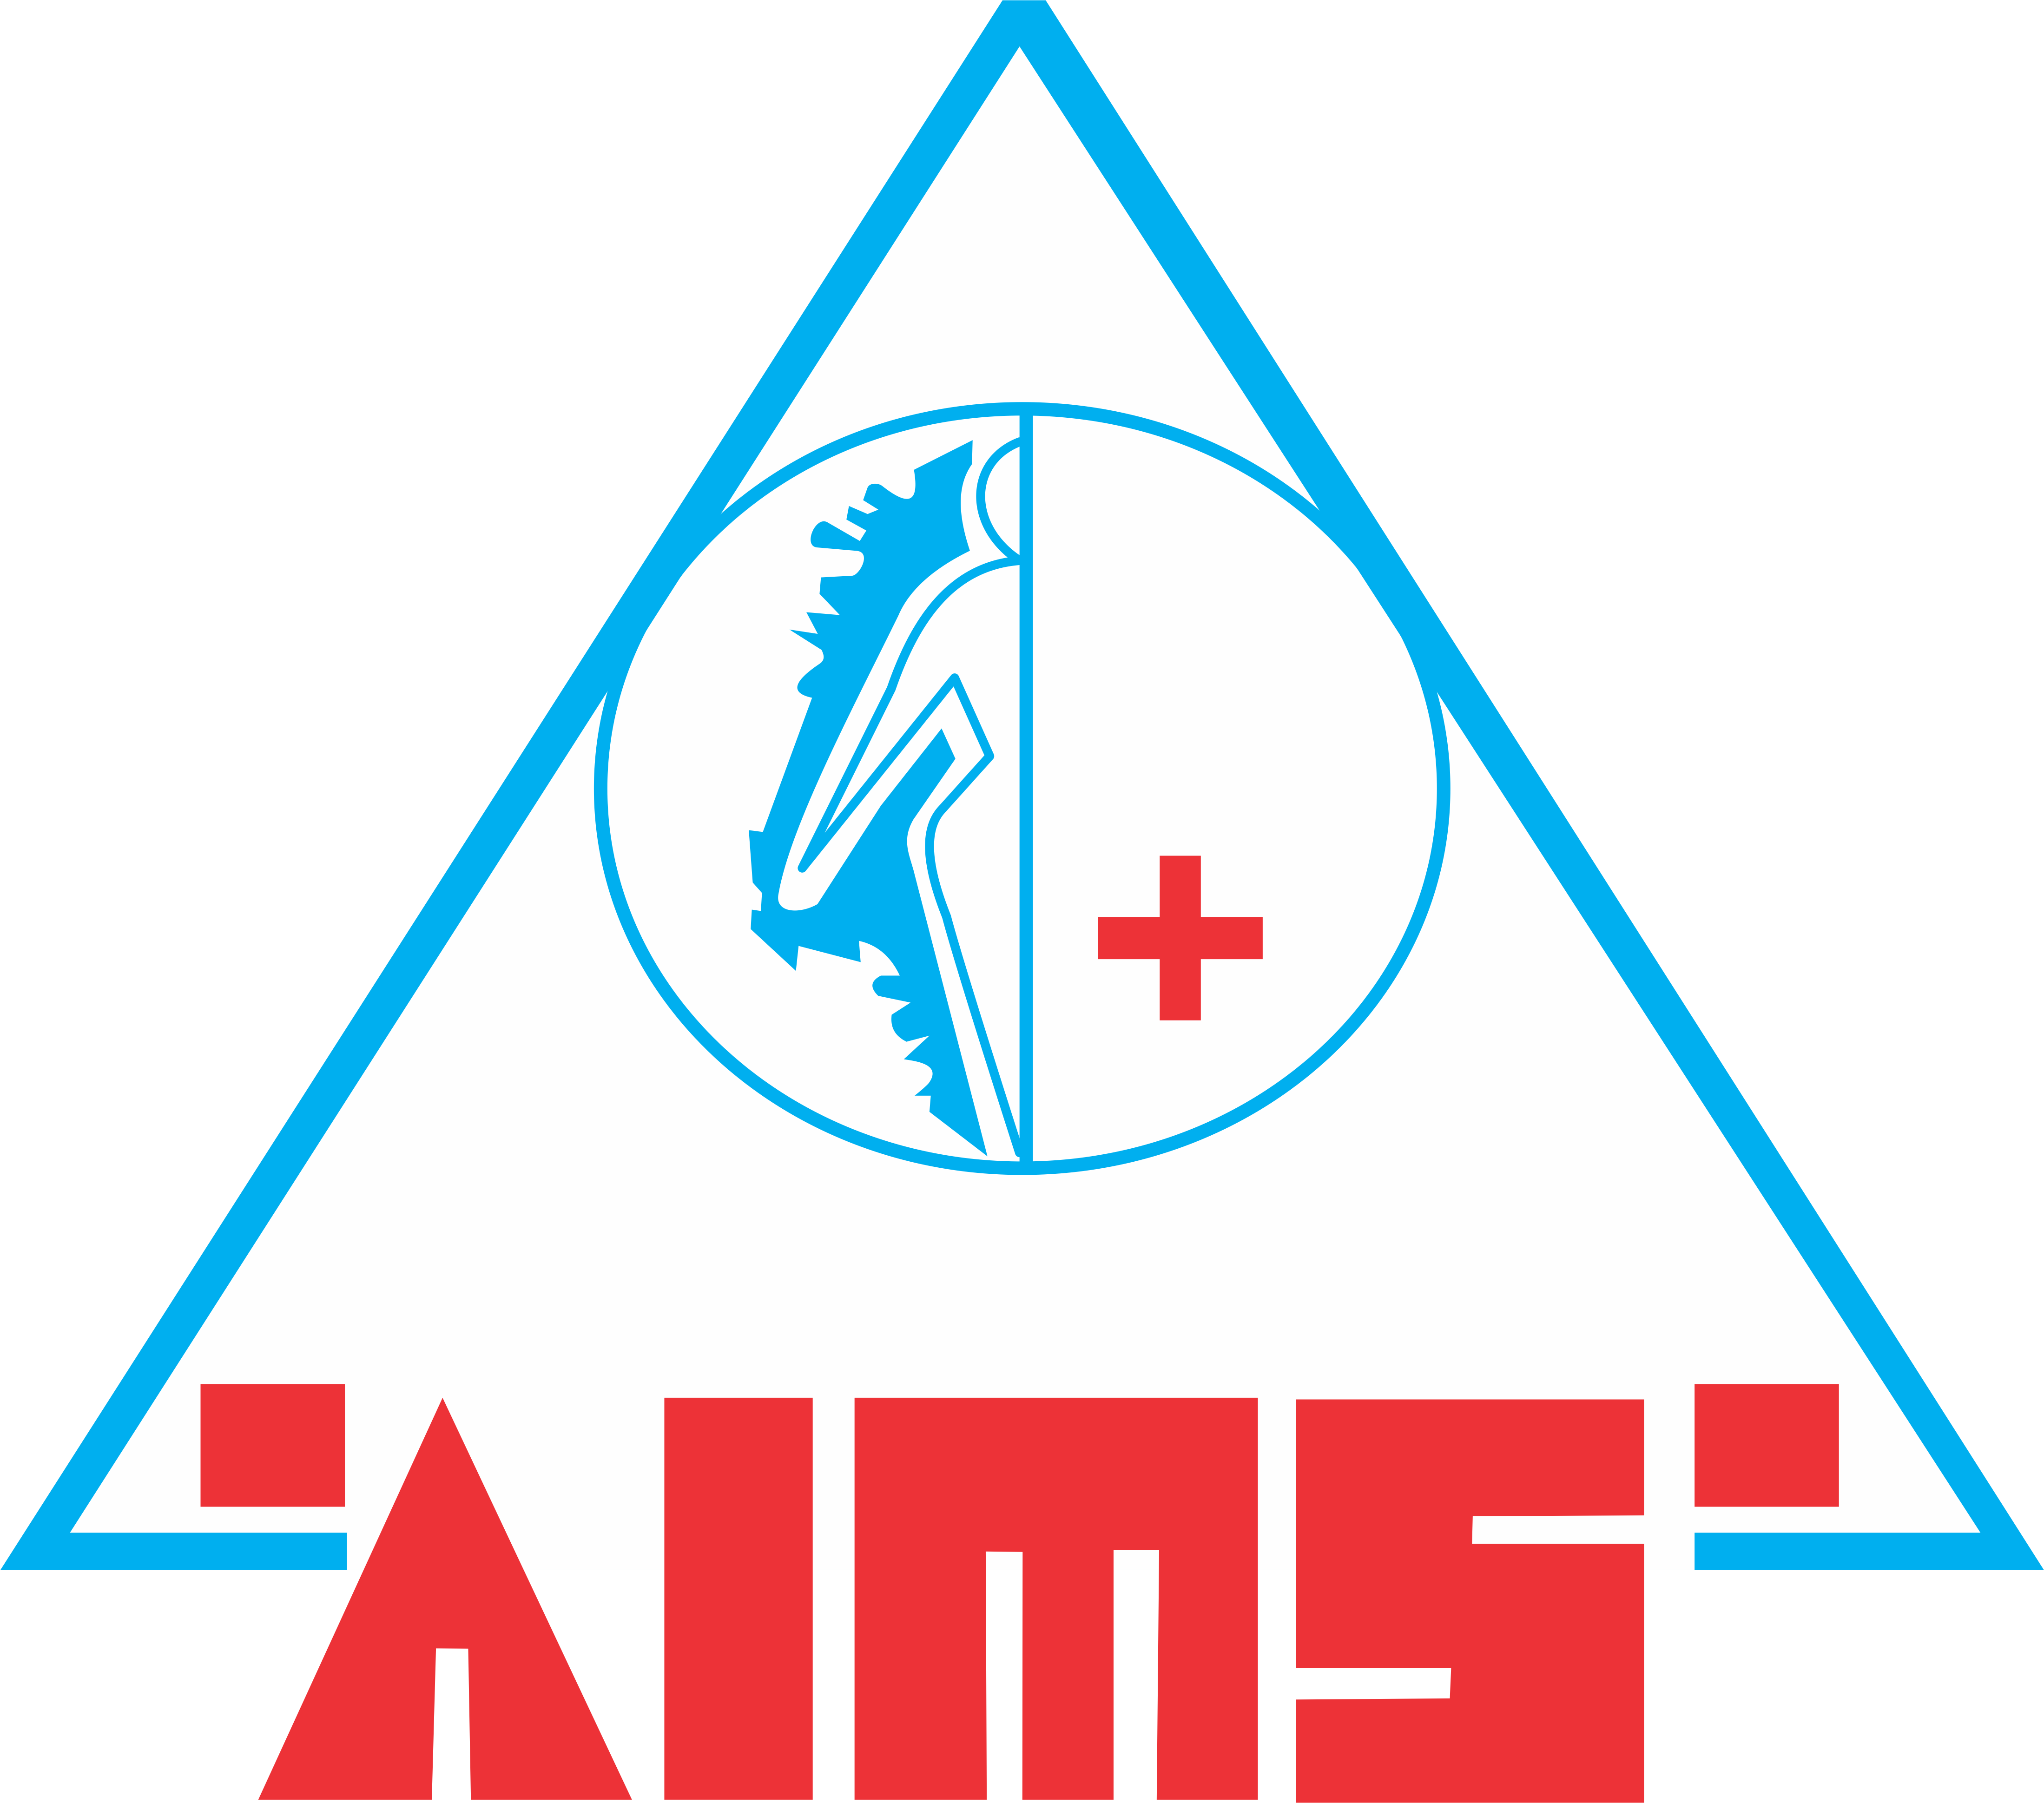 Anant Multispeciality Hospital|Hospitals|Medical Services